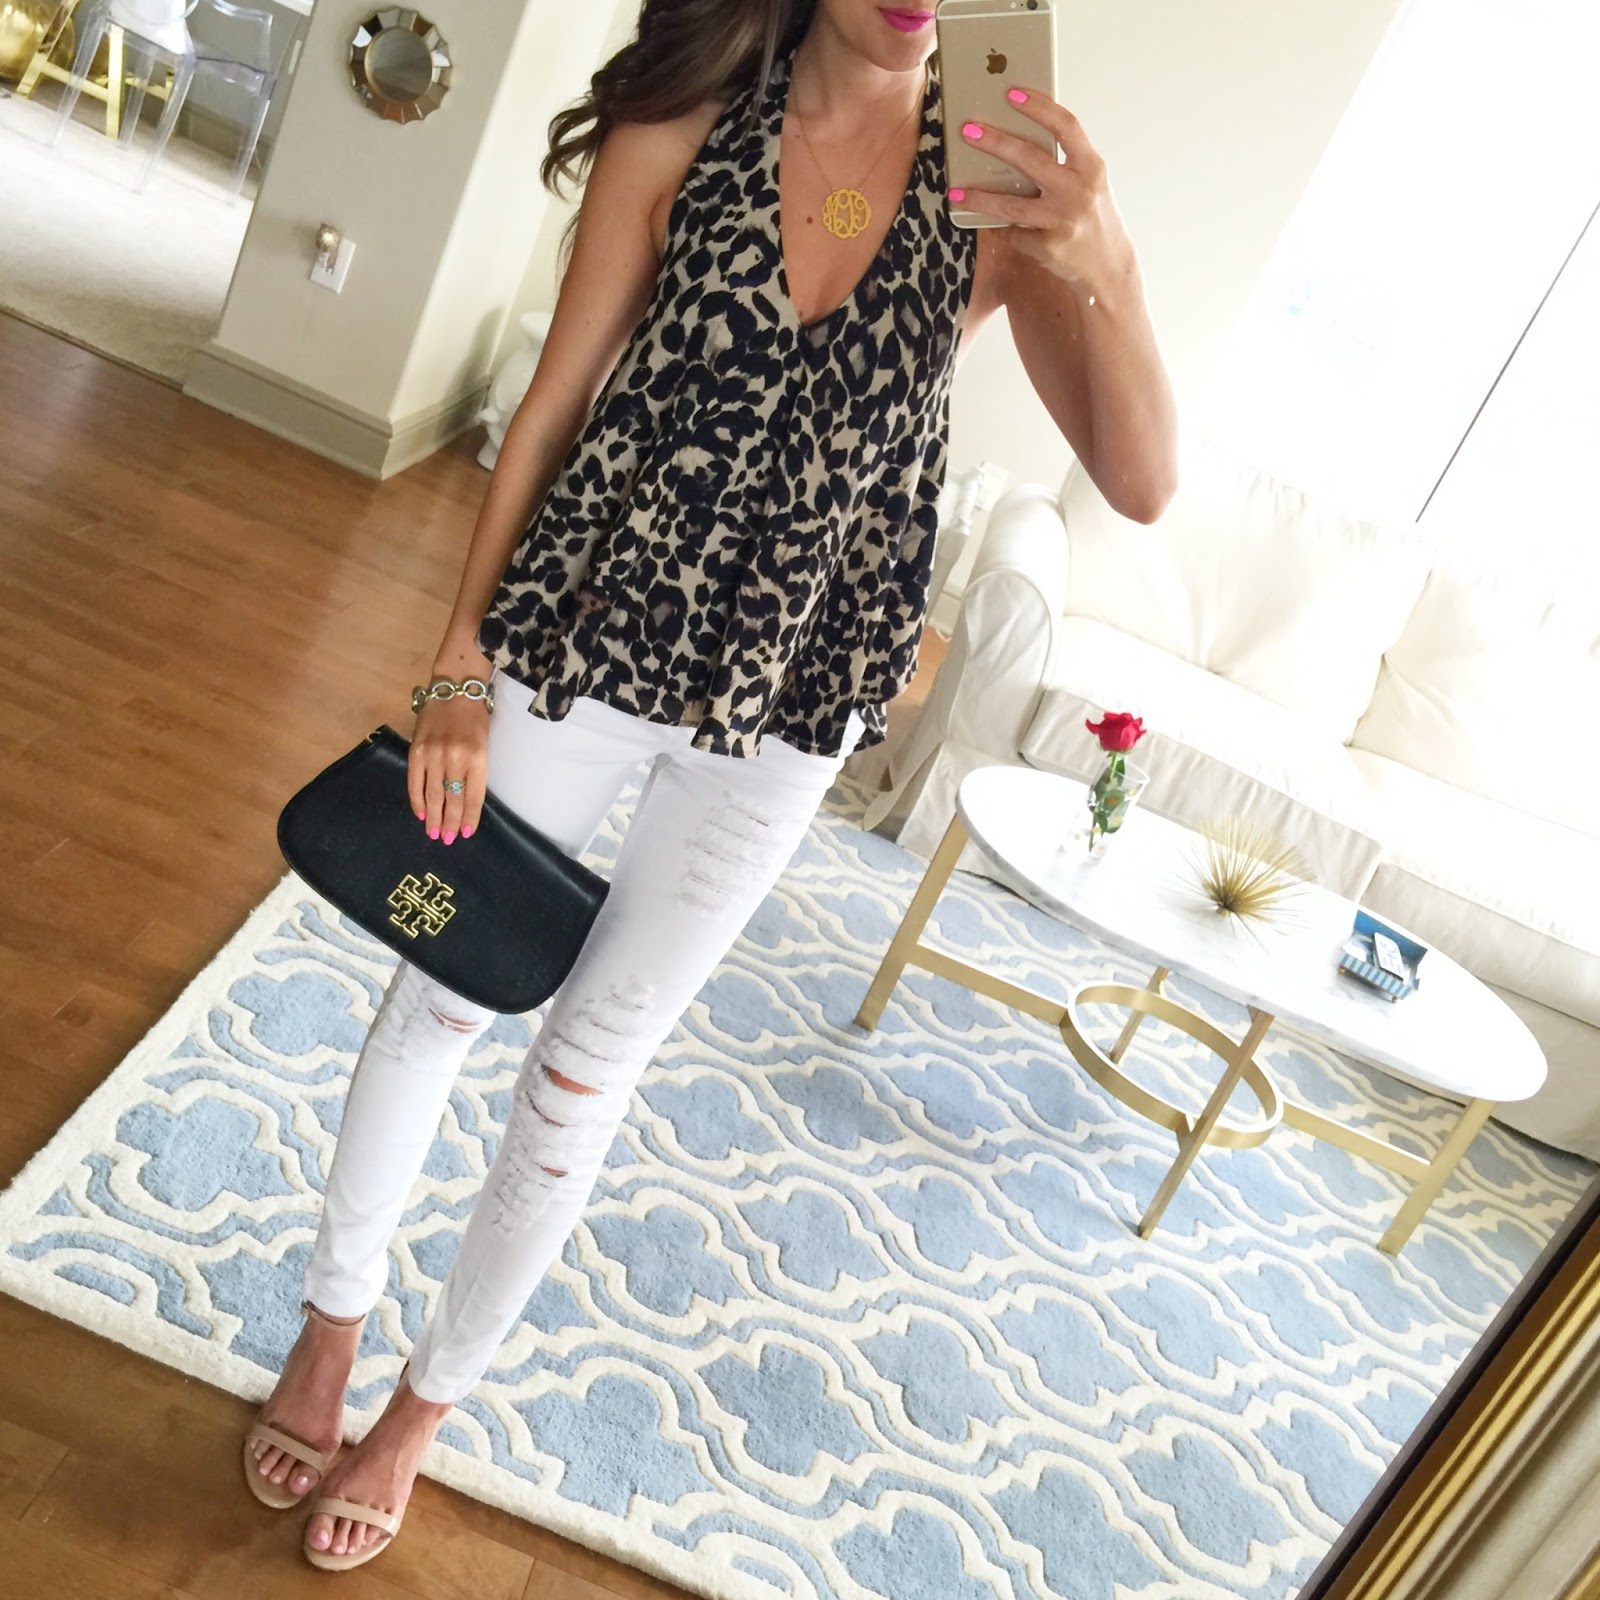 Latest Instagrams – Where Everything is From - Southern Curls & Pearls